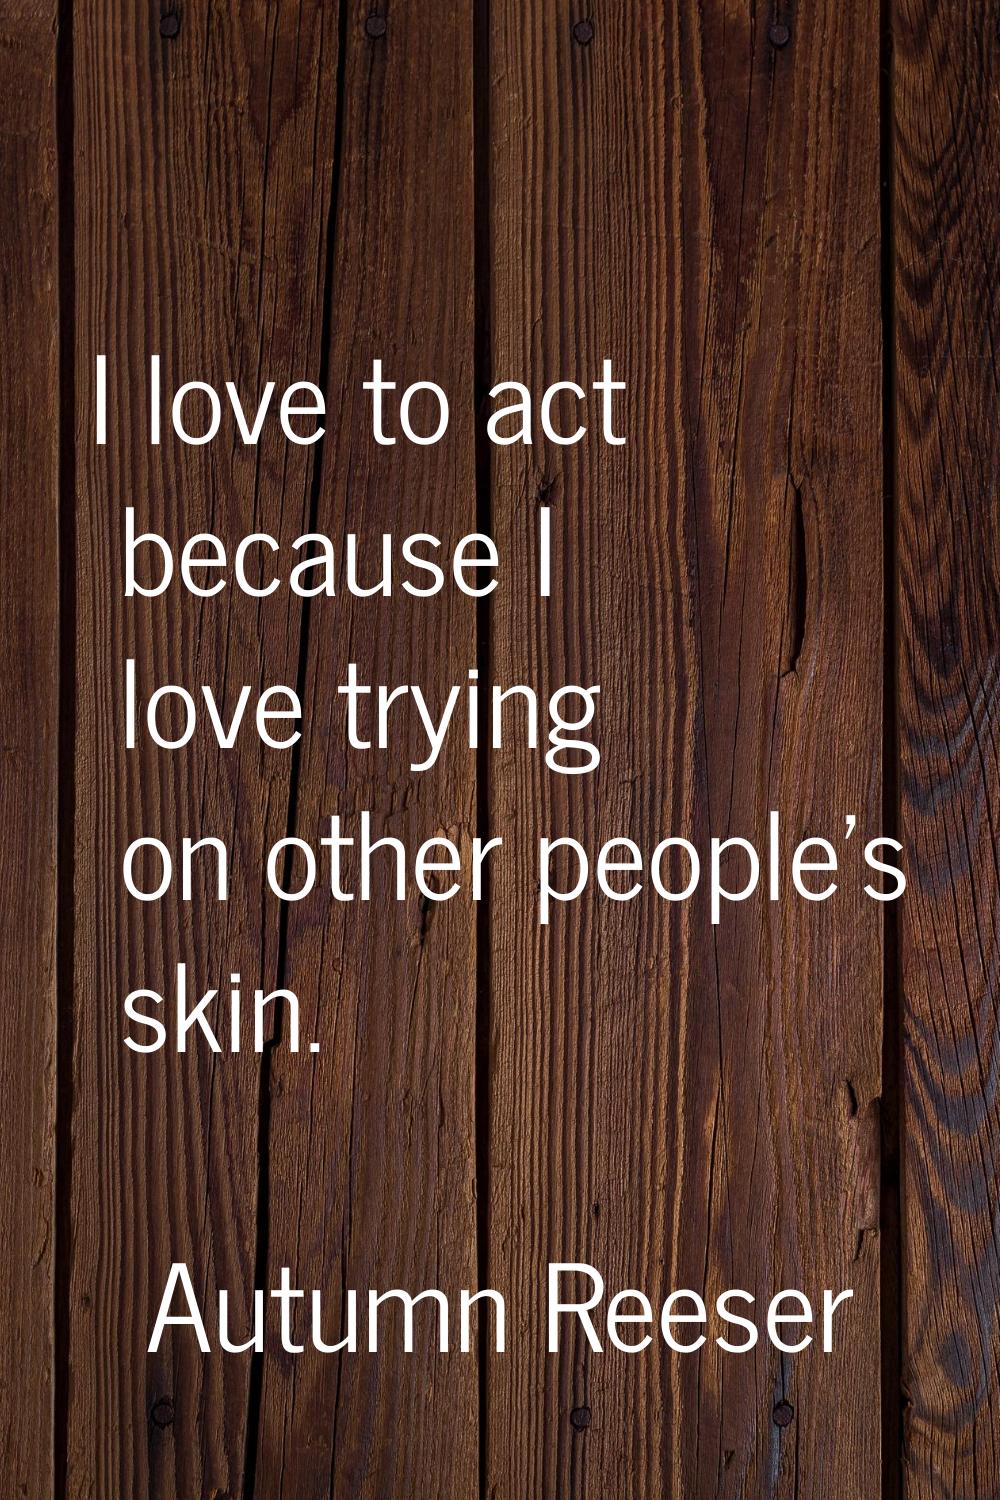 I love to act because I love trying on other people's skin.